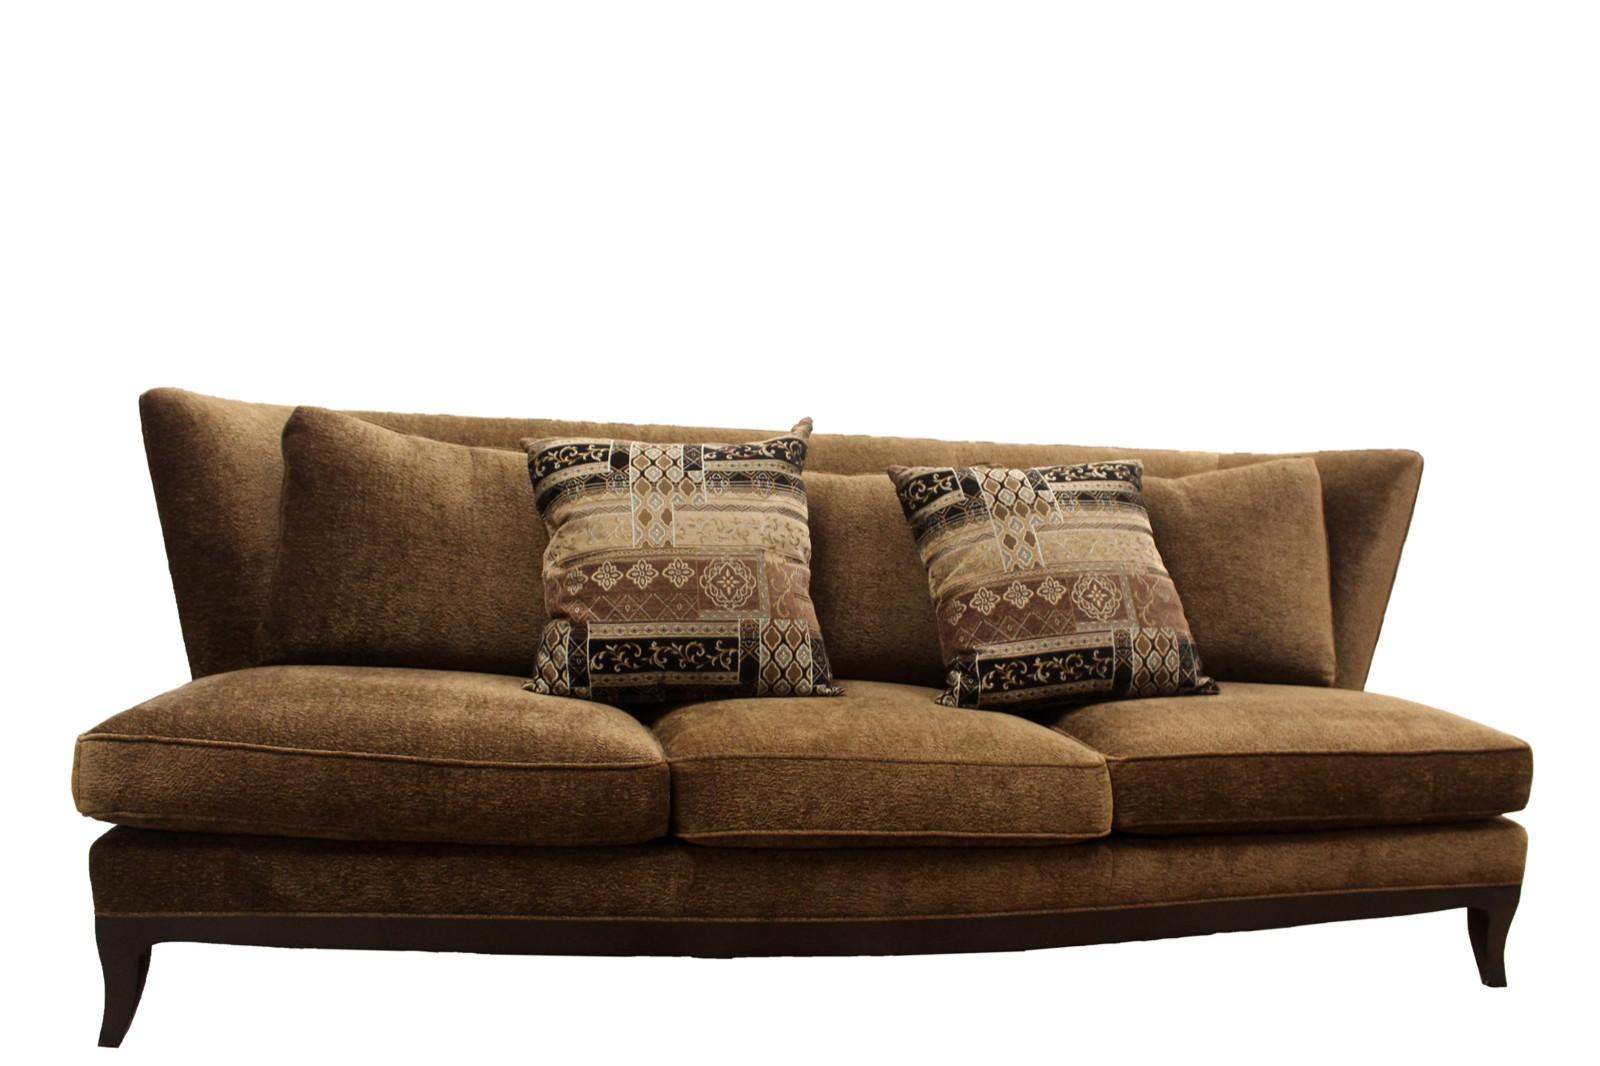 We present this beautiful art deco style sofa by Donghia called the Geneva sofa, in a chocolate brown chenille upholstery with mahogany wood flared legs. In excellent condition. Dimensions: 89.5